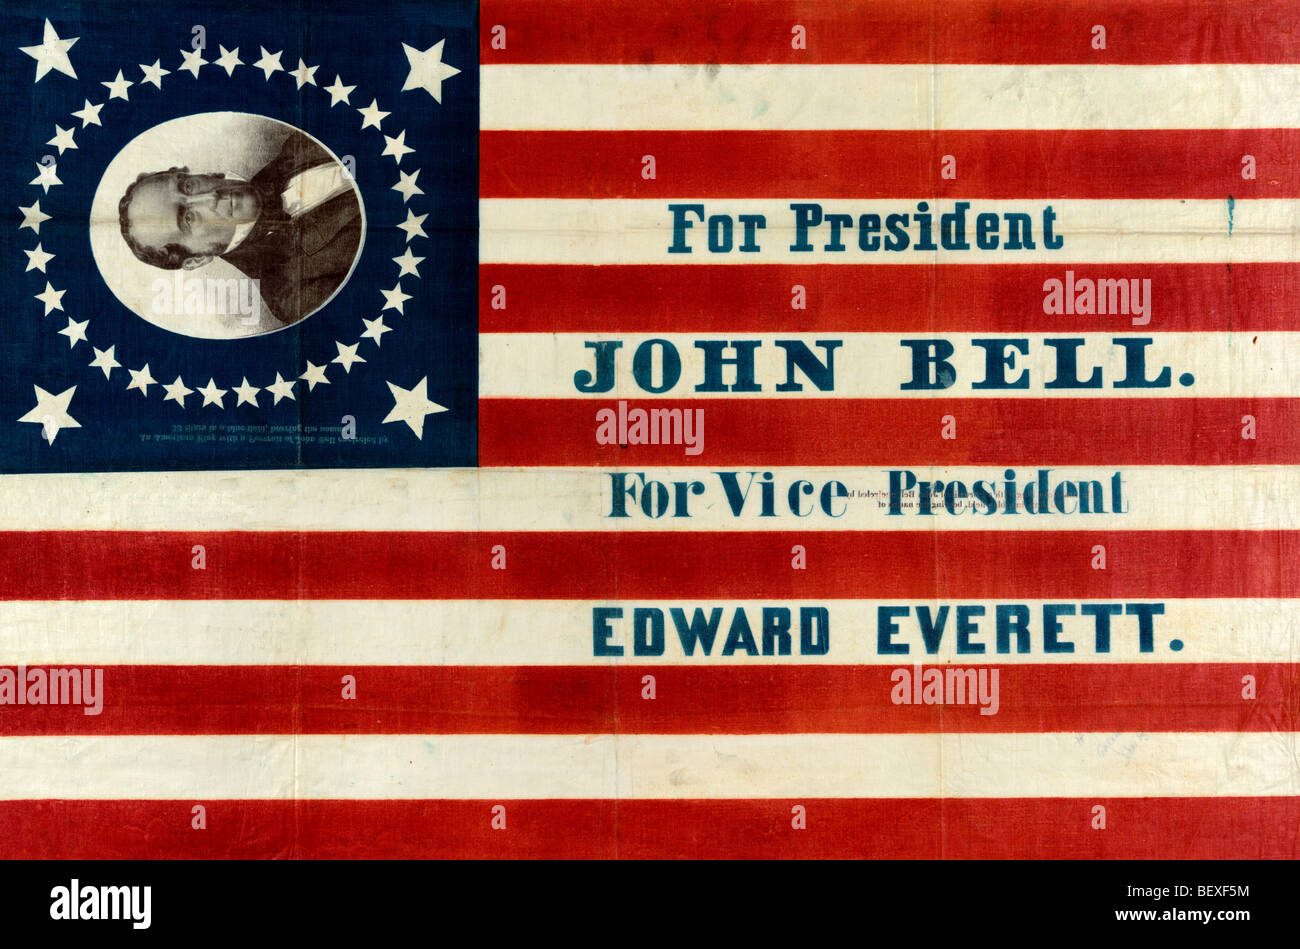 Campaign banner for John Bell in 1860 USA Presidential Election Stock Photo